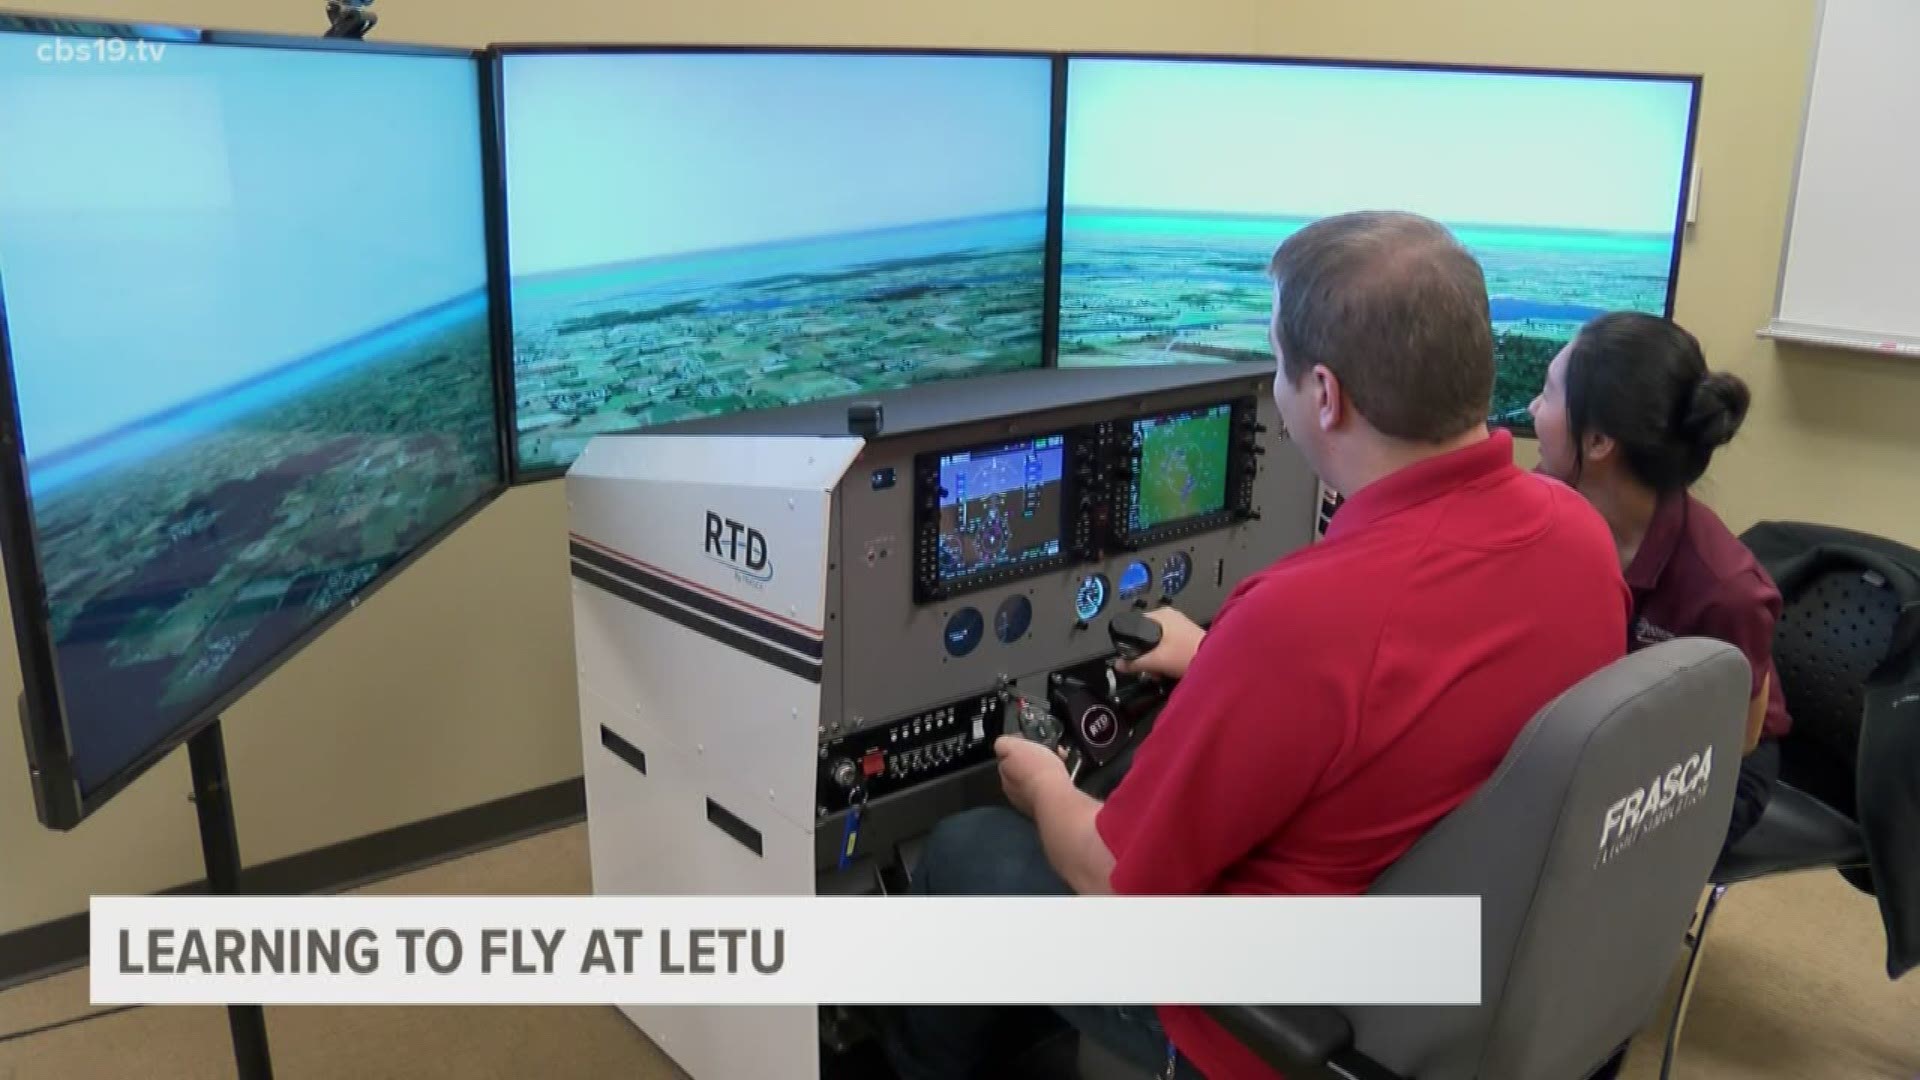 LeTourneau University has two brand new flight simulators they just unveiled. Meteorologist Michael Behrens got to test them out and learns how they will be used.